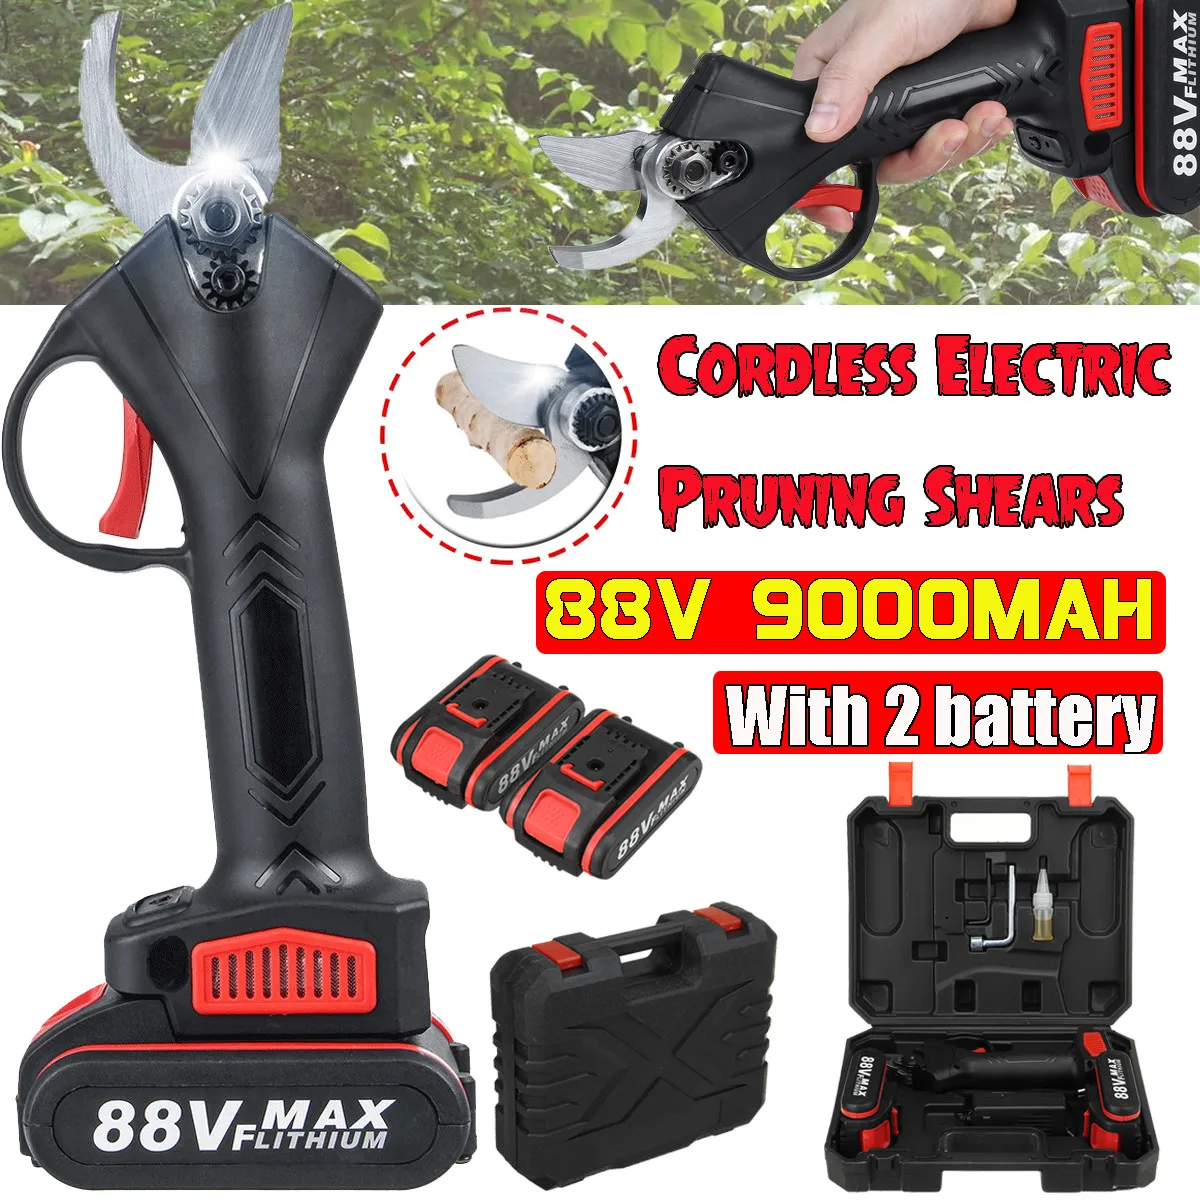 

88V Electric Garden Pruner Cordless Tool Adjustable Electric Pruning Shears Lithium Branch Cutter Grafting Tool Garden Scissors